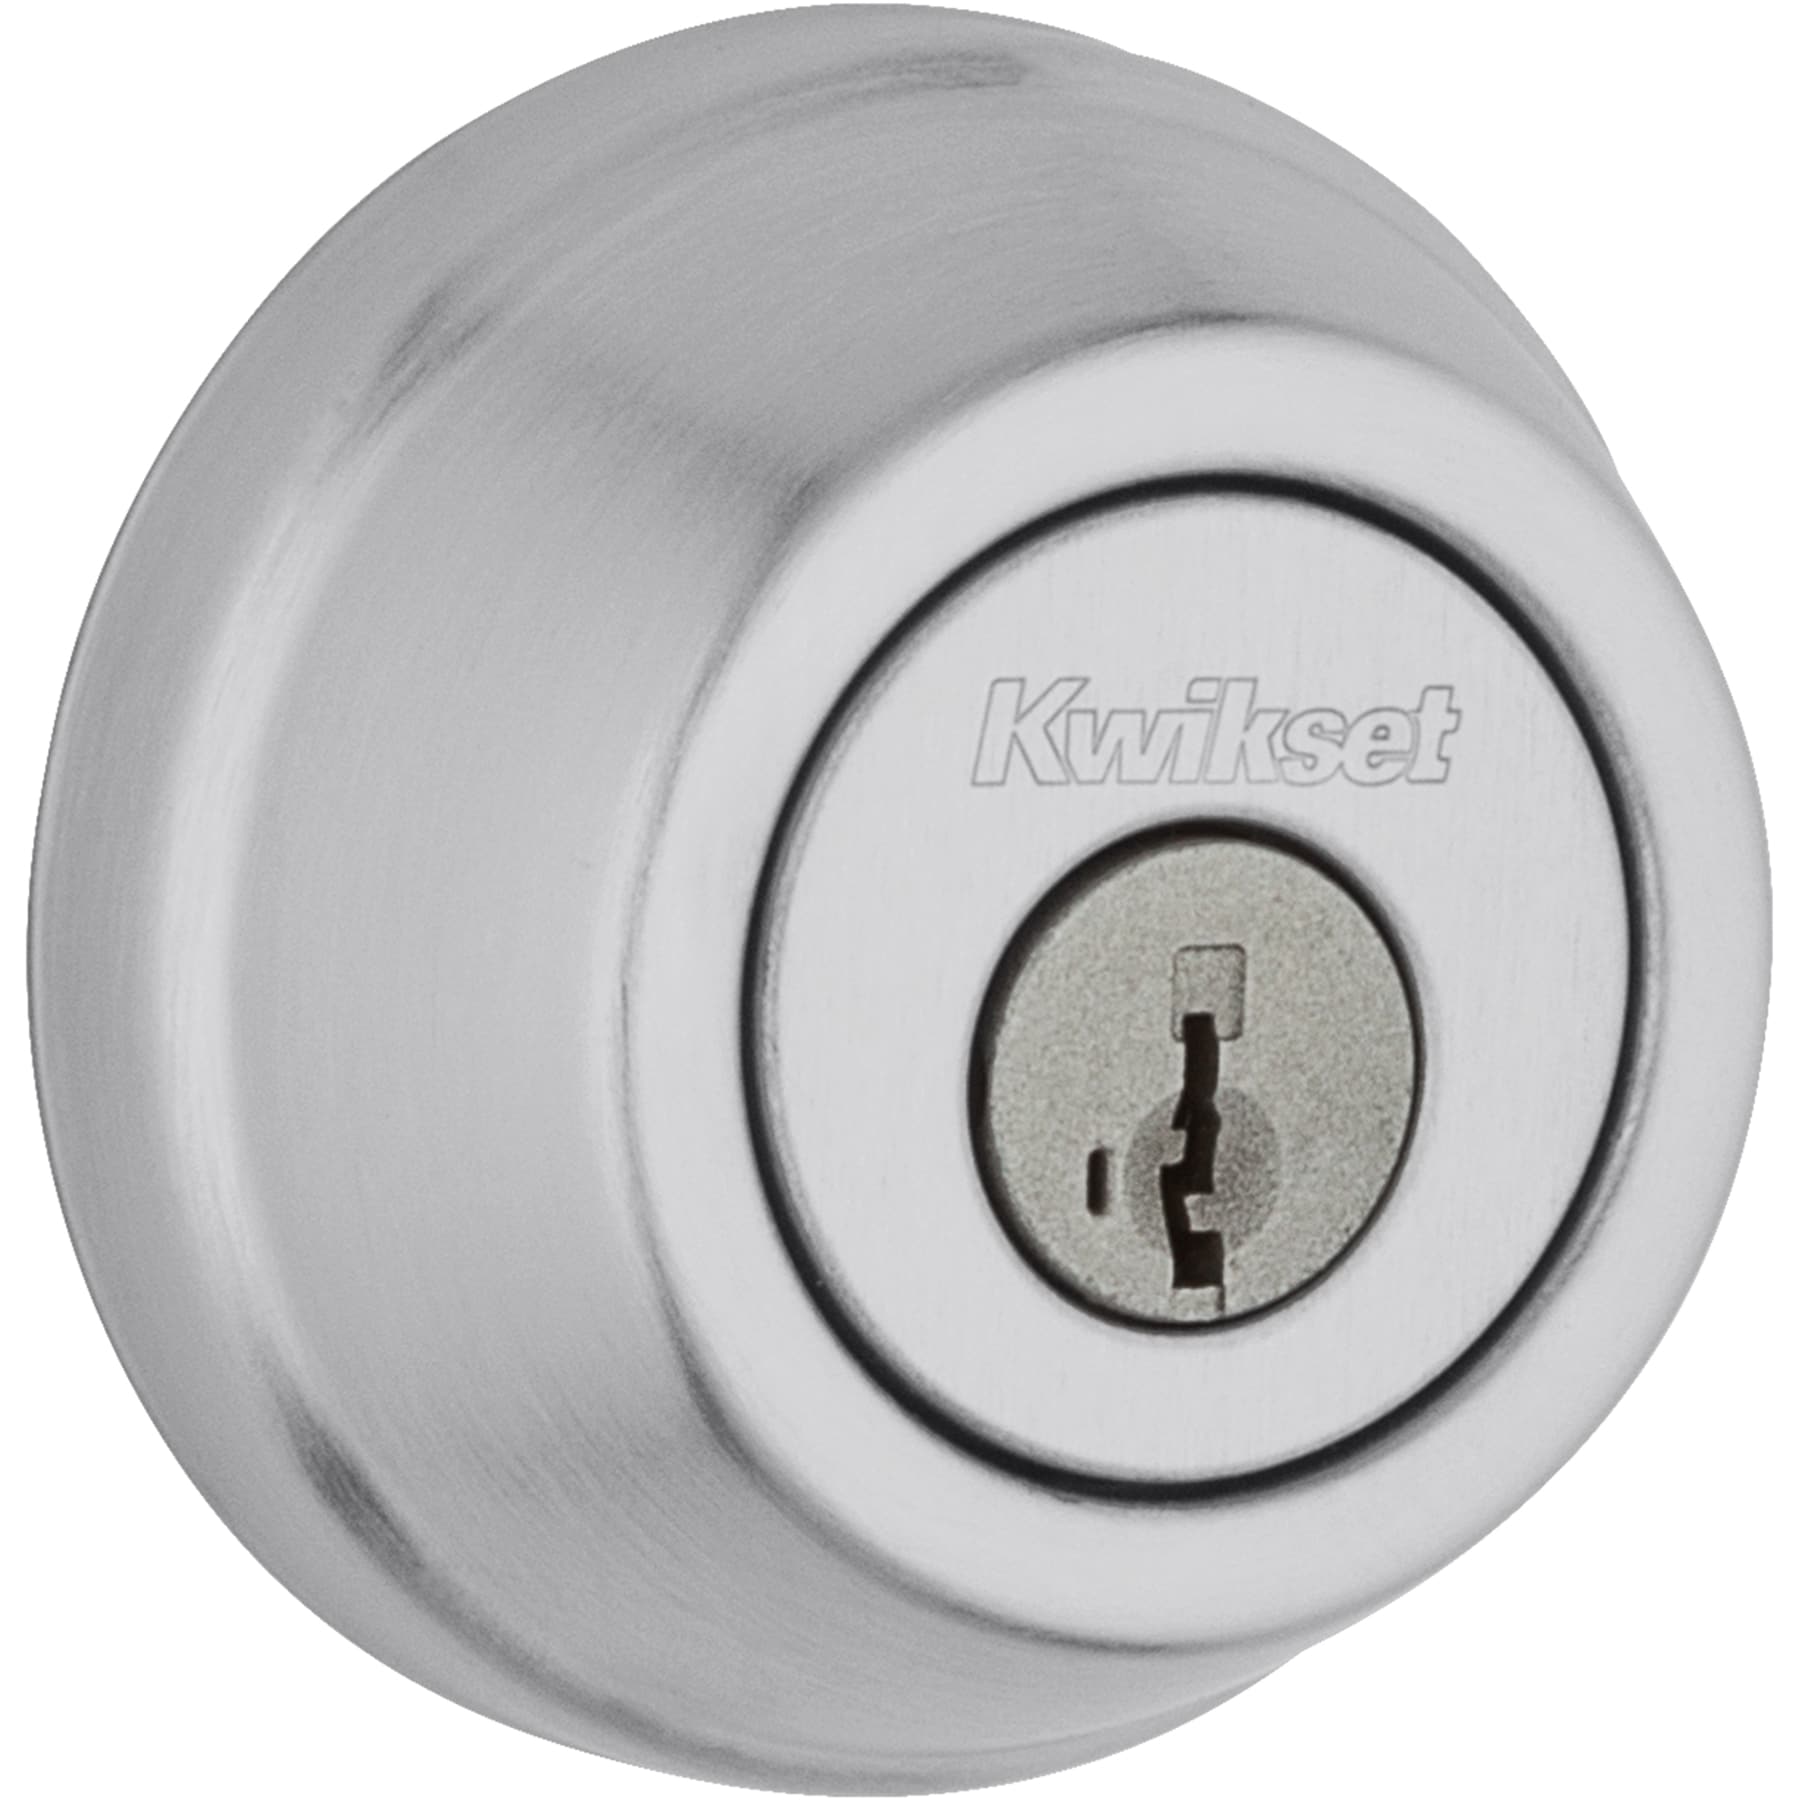 Kwikset Signatures 780 Series Satin Chrome with SmartKey Single Cylinder  Deadbolt at